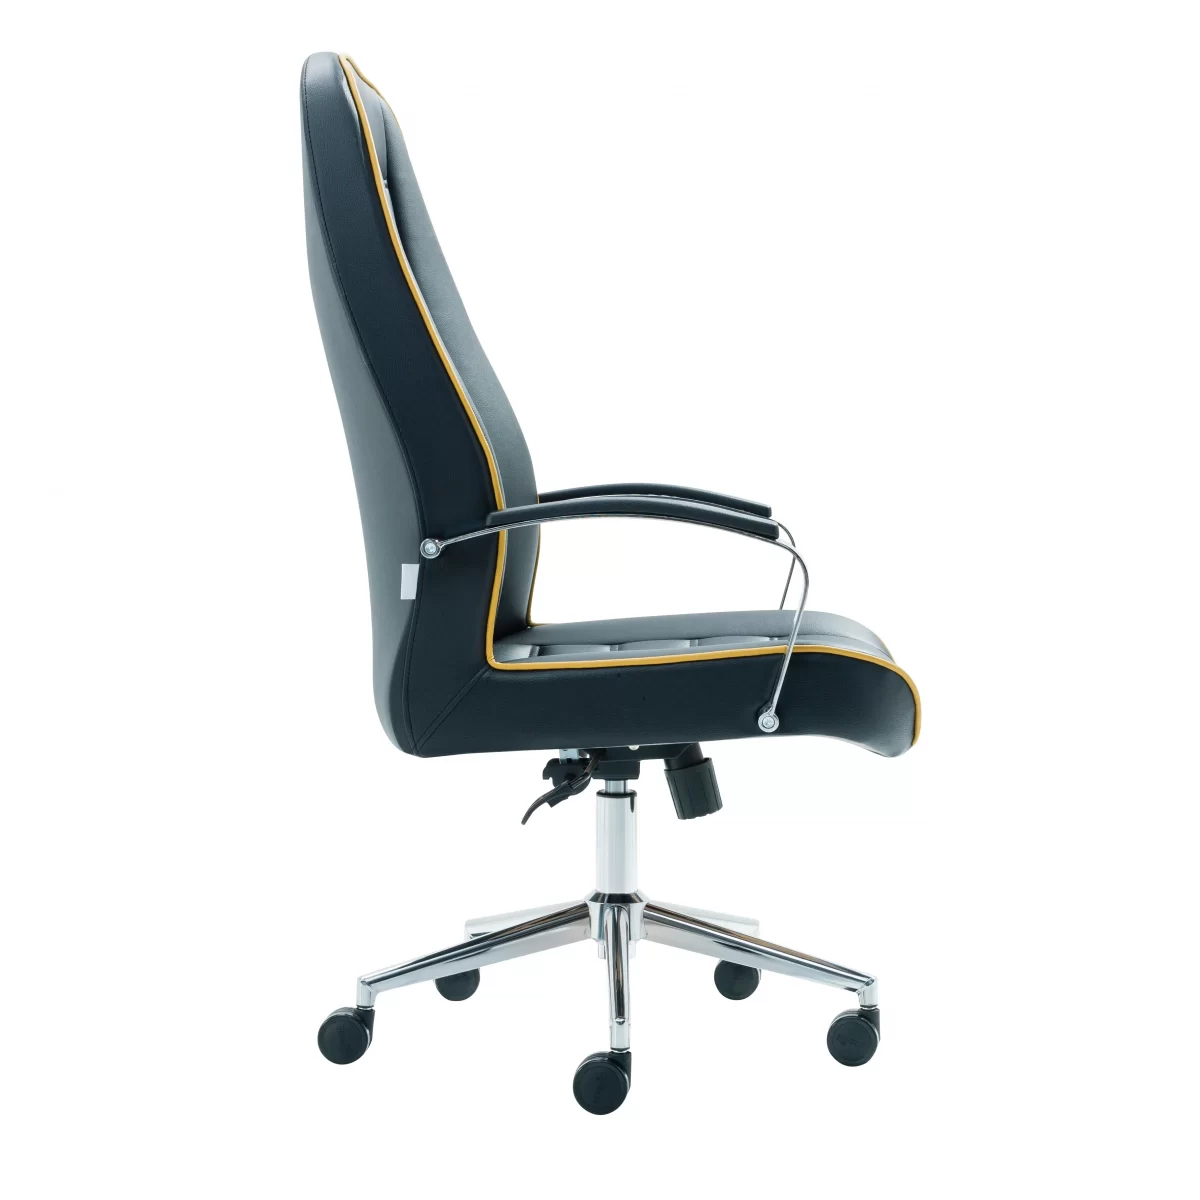 Karina Executive Office Chair Modern Office Chairs Turkey 2 scaled